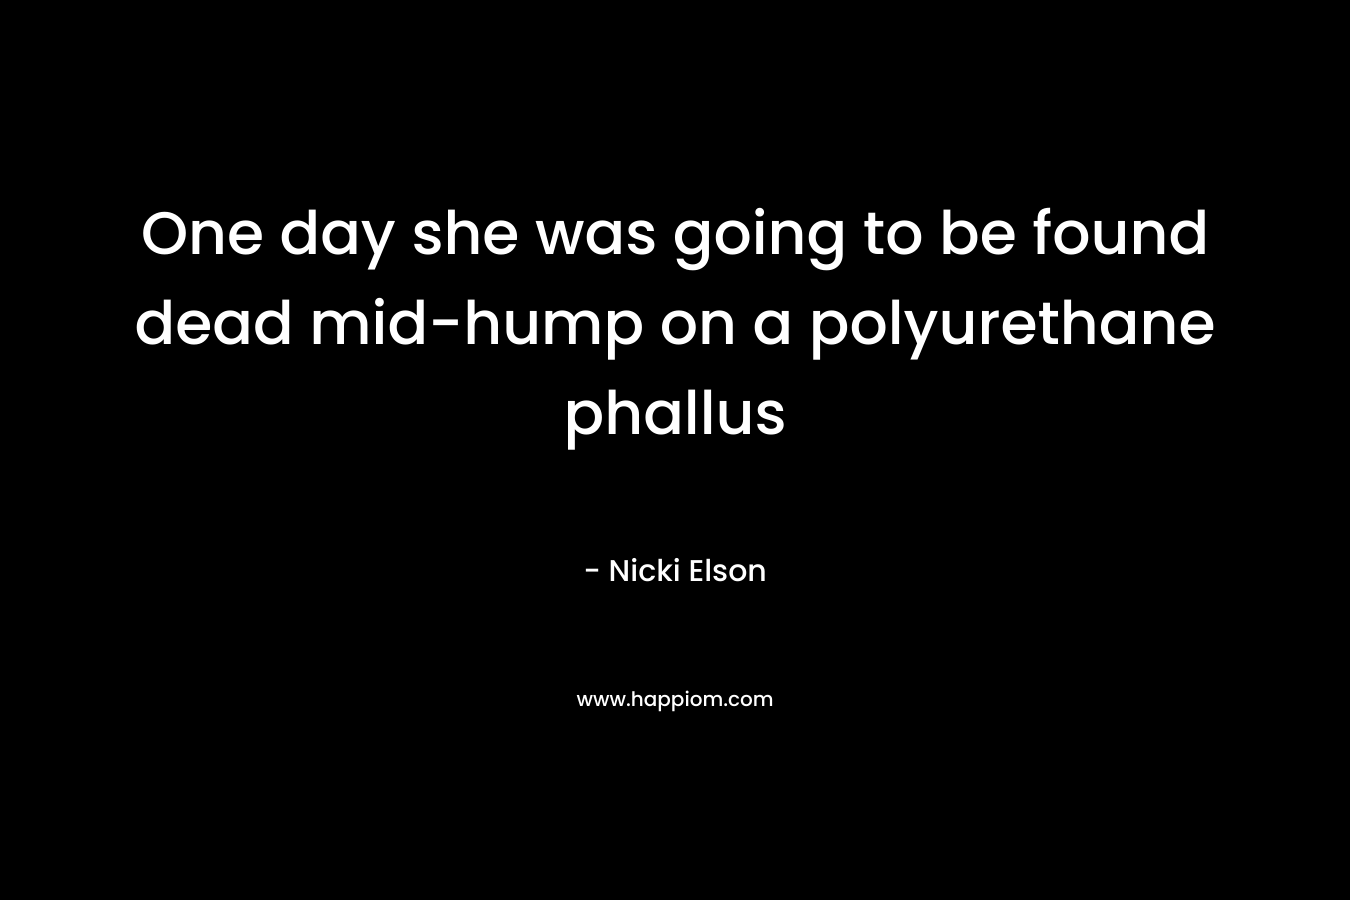 One day she was going to be found dead mid-hump on a polyurethane phallus – Nicki Elson